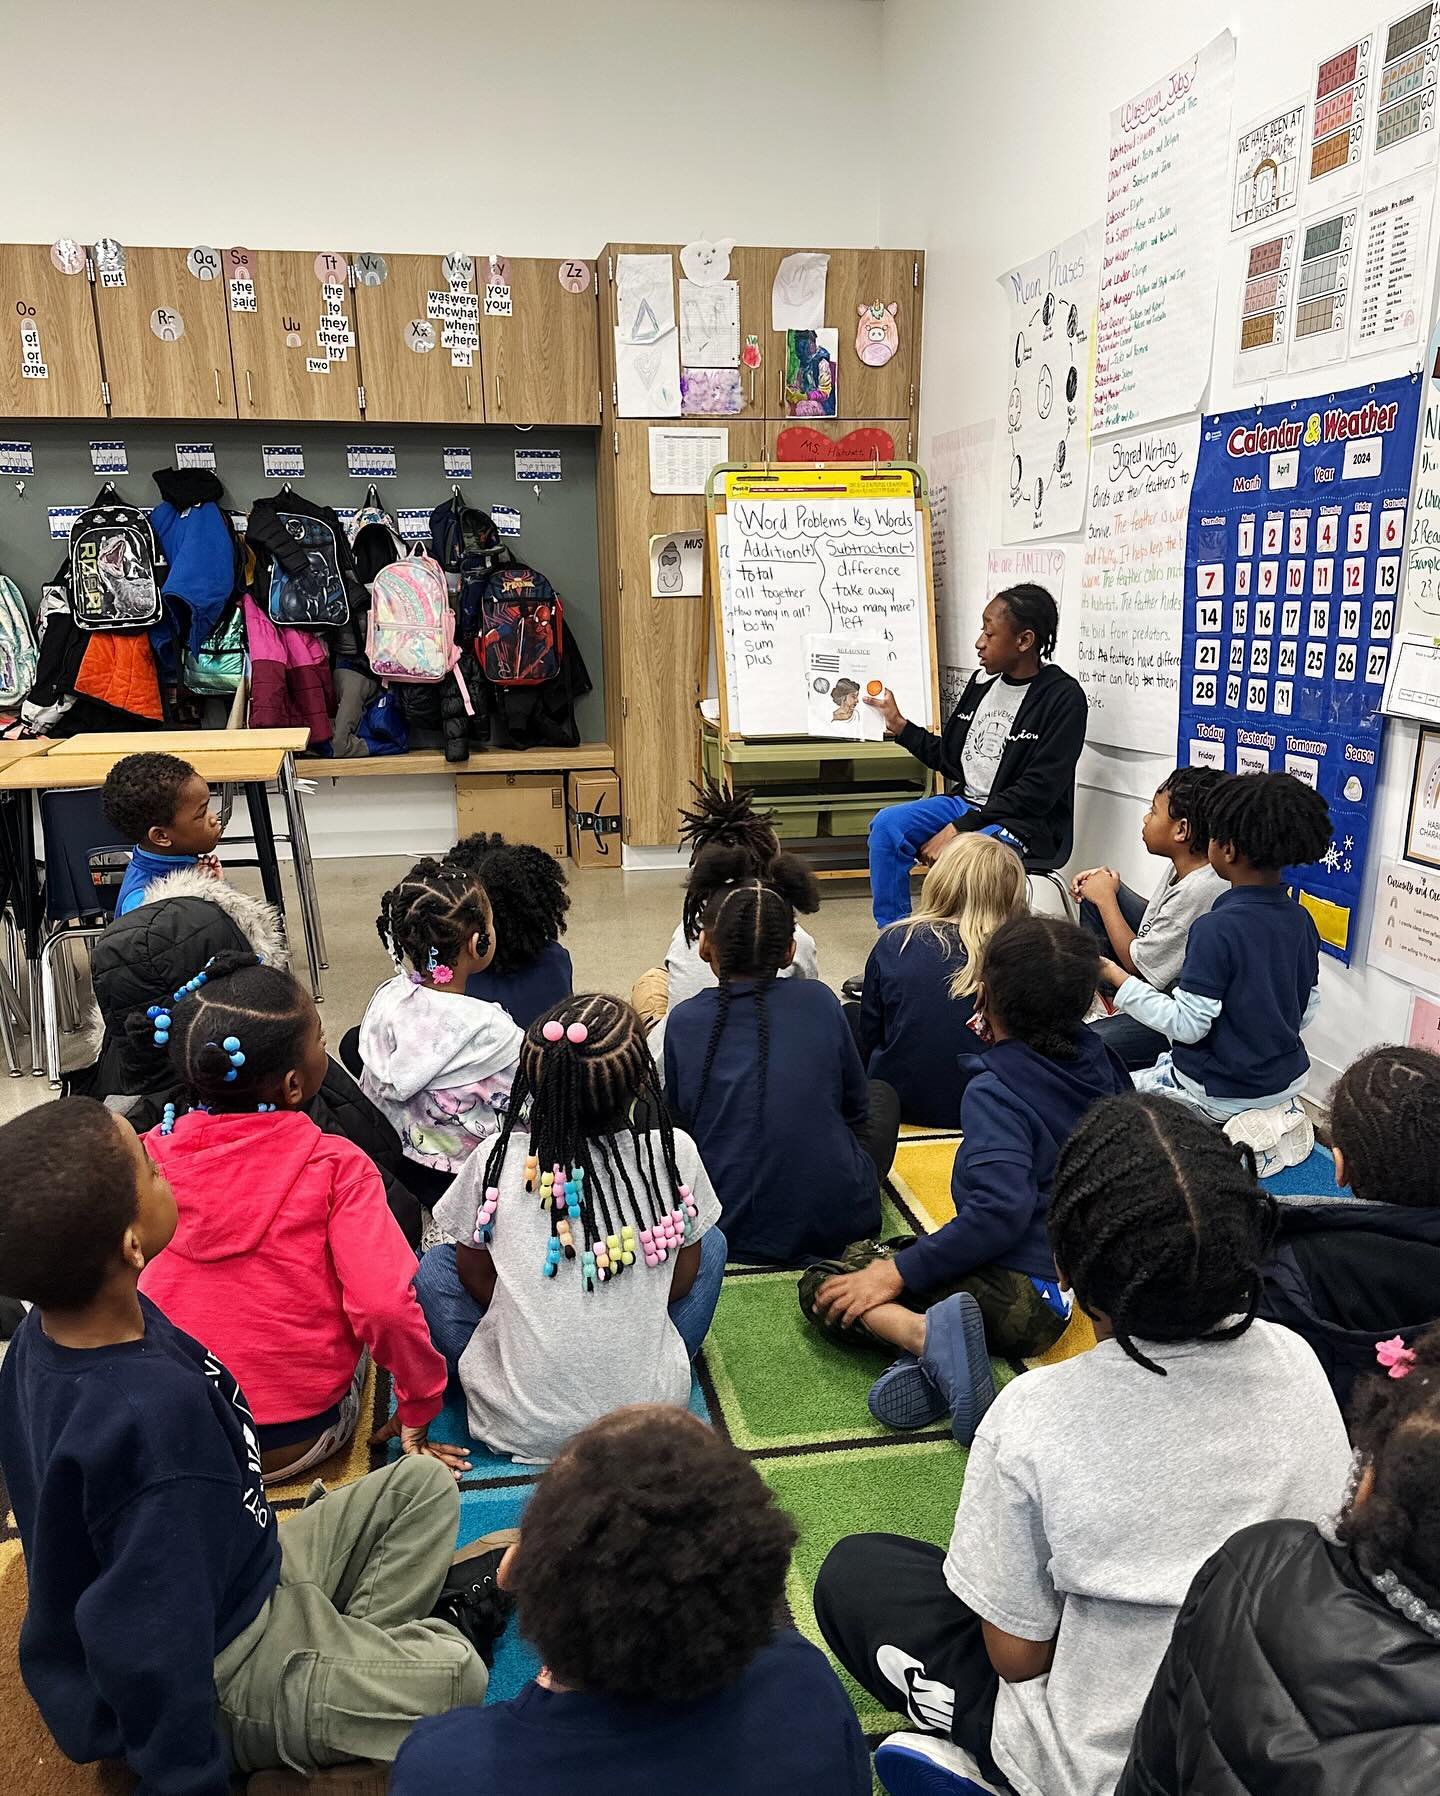 6th graders created professional books centered around hidden figures in history. For their Celebration of Learning, they joined 1st grade crews to share their texts and engage in conversations addressing the problem with people not getting the credi